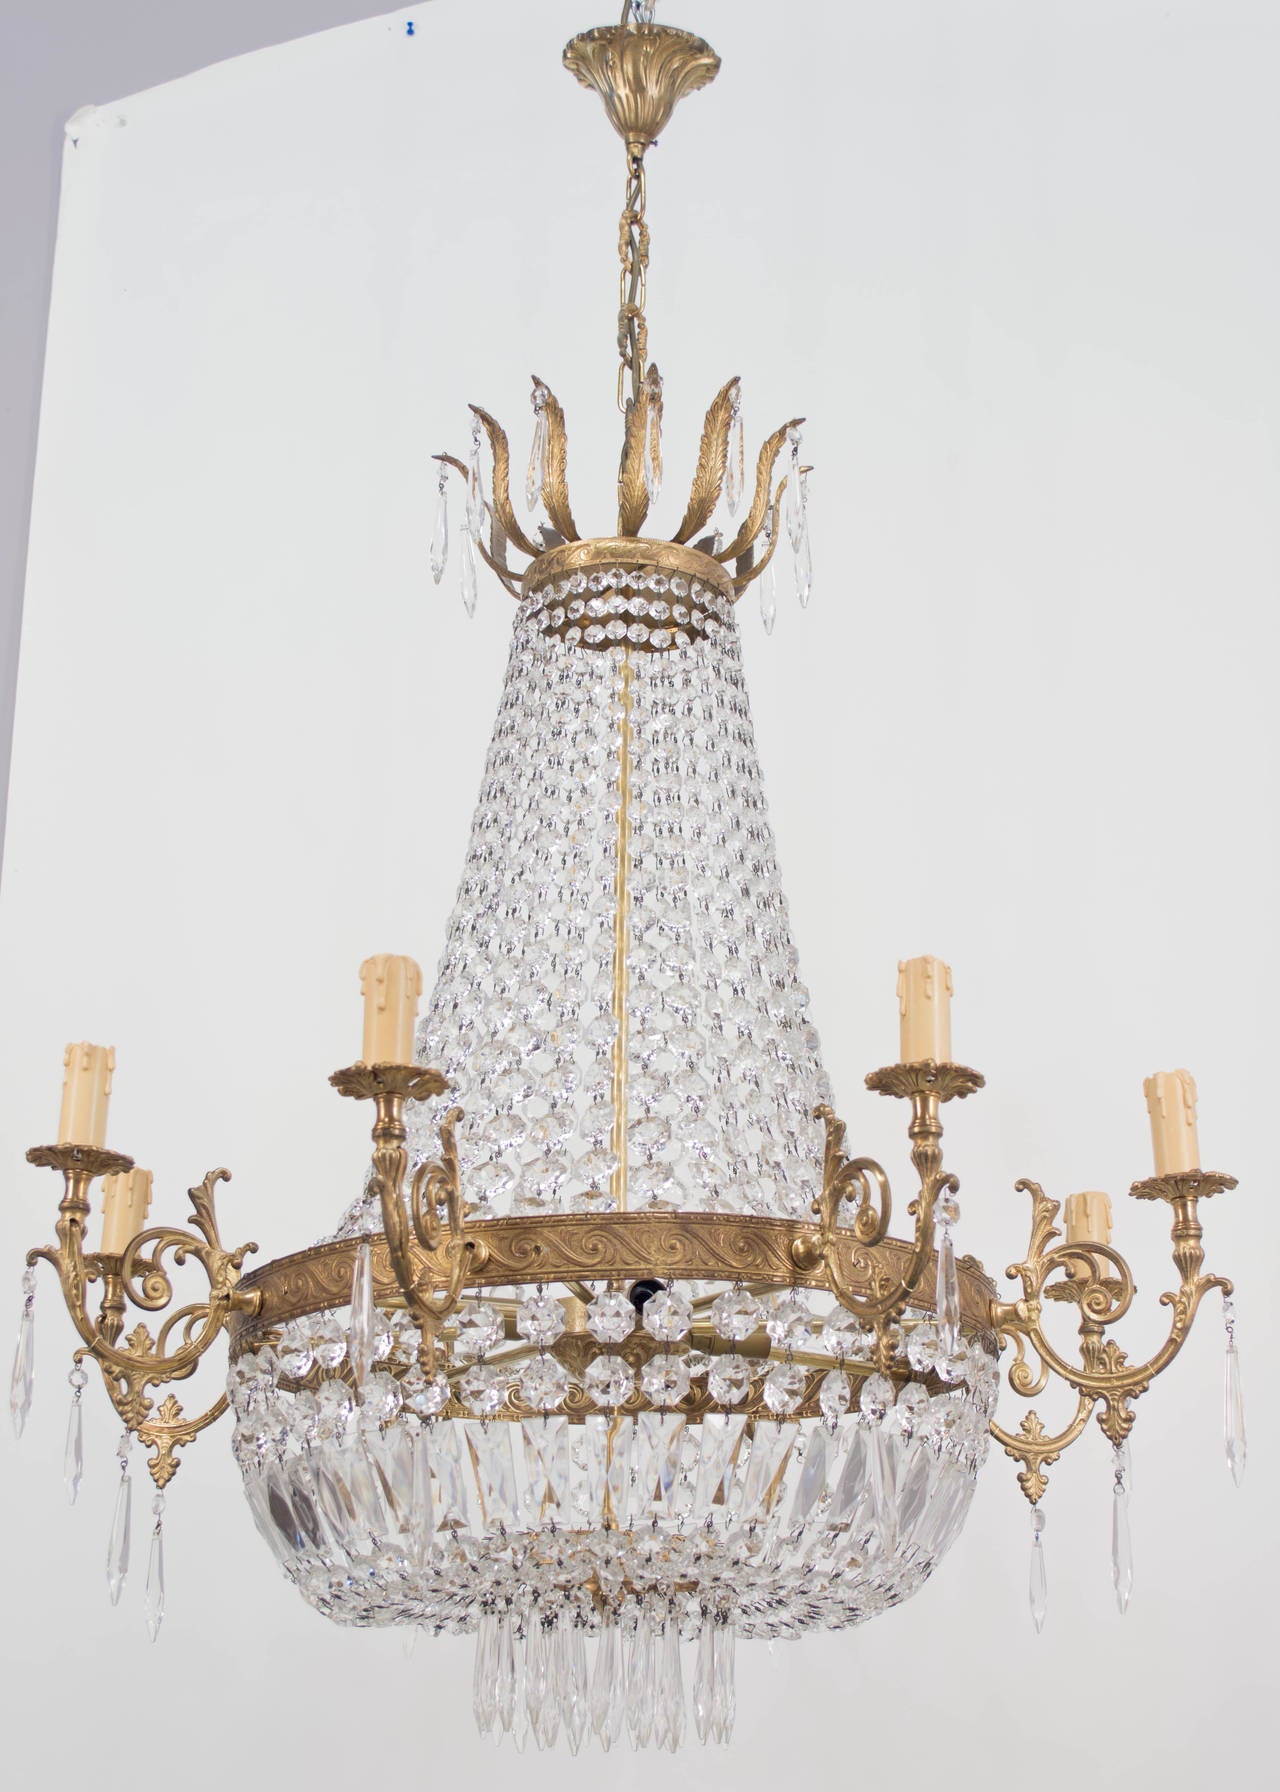 Pair Of French Empire Style Crystal Chandeliers At Stdibs